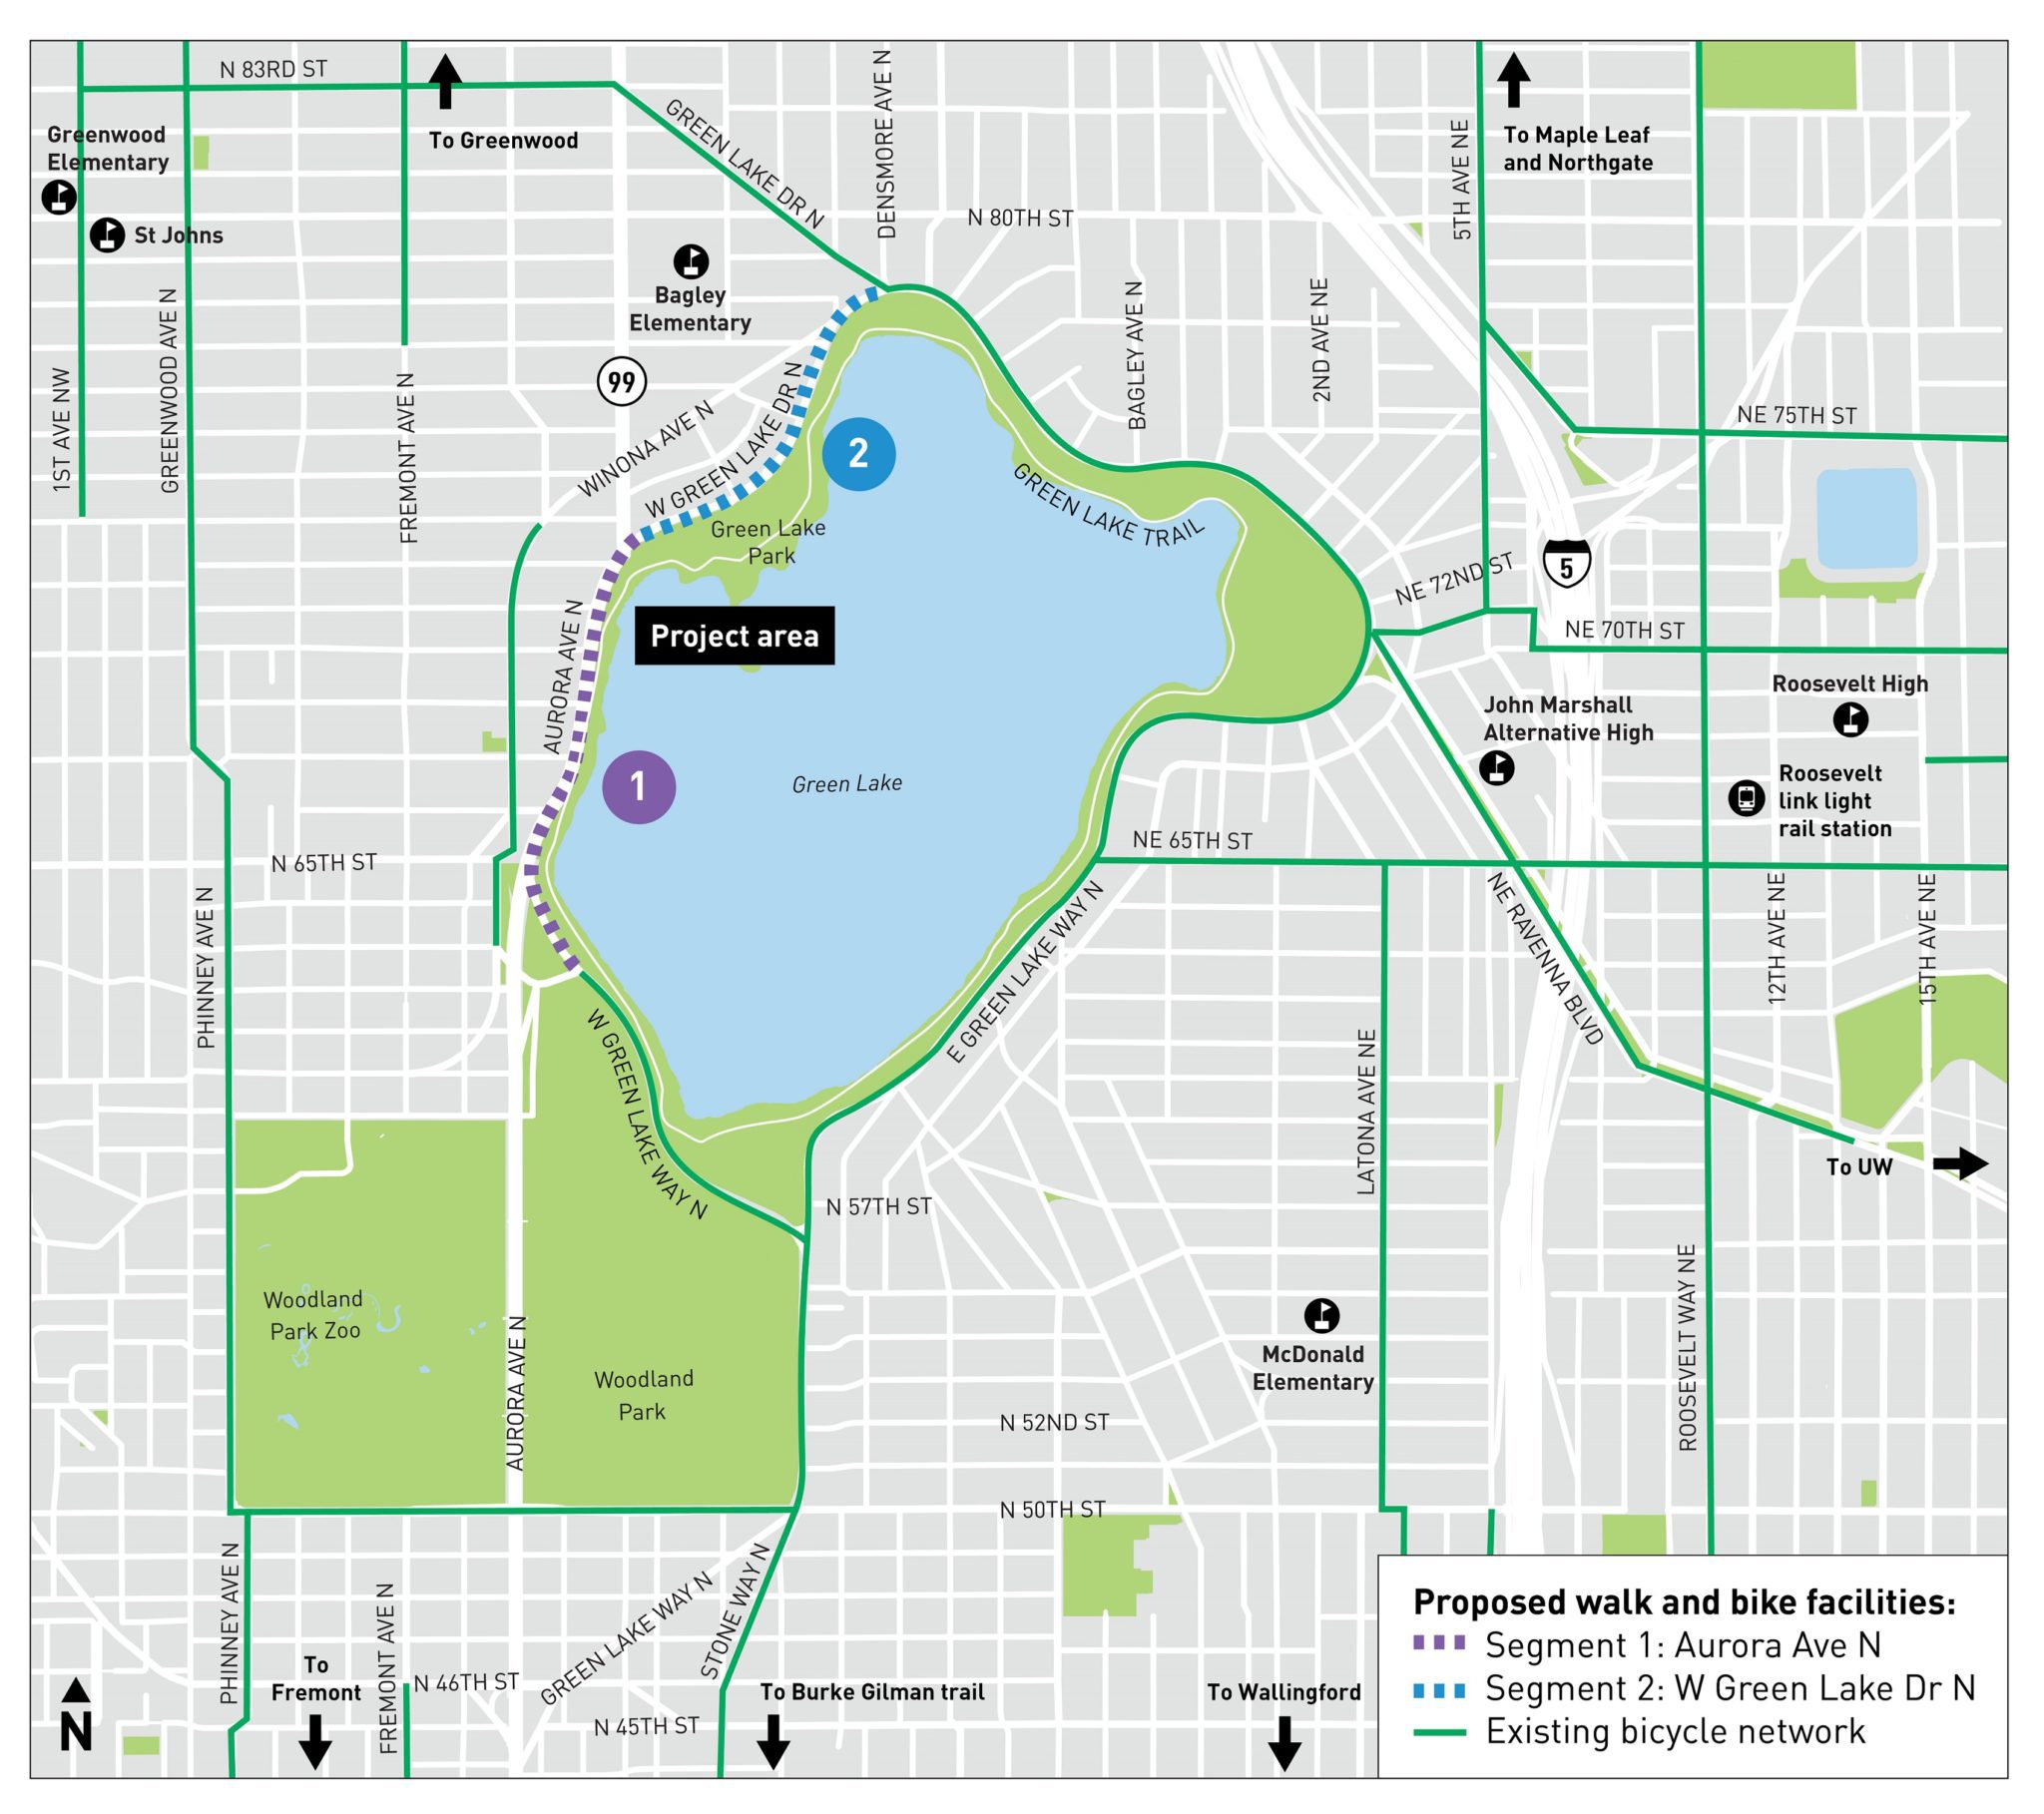 Map of Green Lake Park in north Seattle. The project area for the Green Lake Outer Loop project is shown in dotted purple and blue lines on the northwest side of the lake. Other bike network routes are shown in solid green lines.